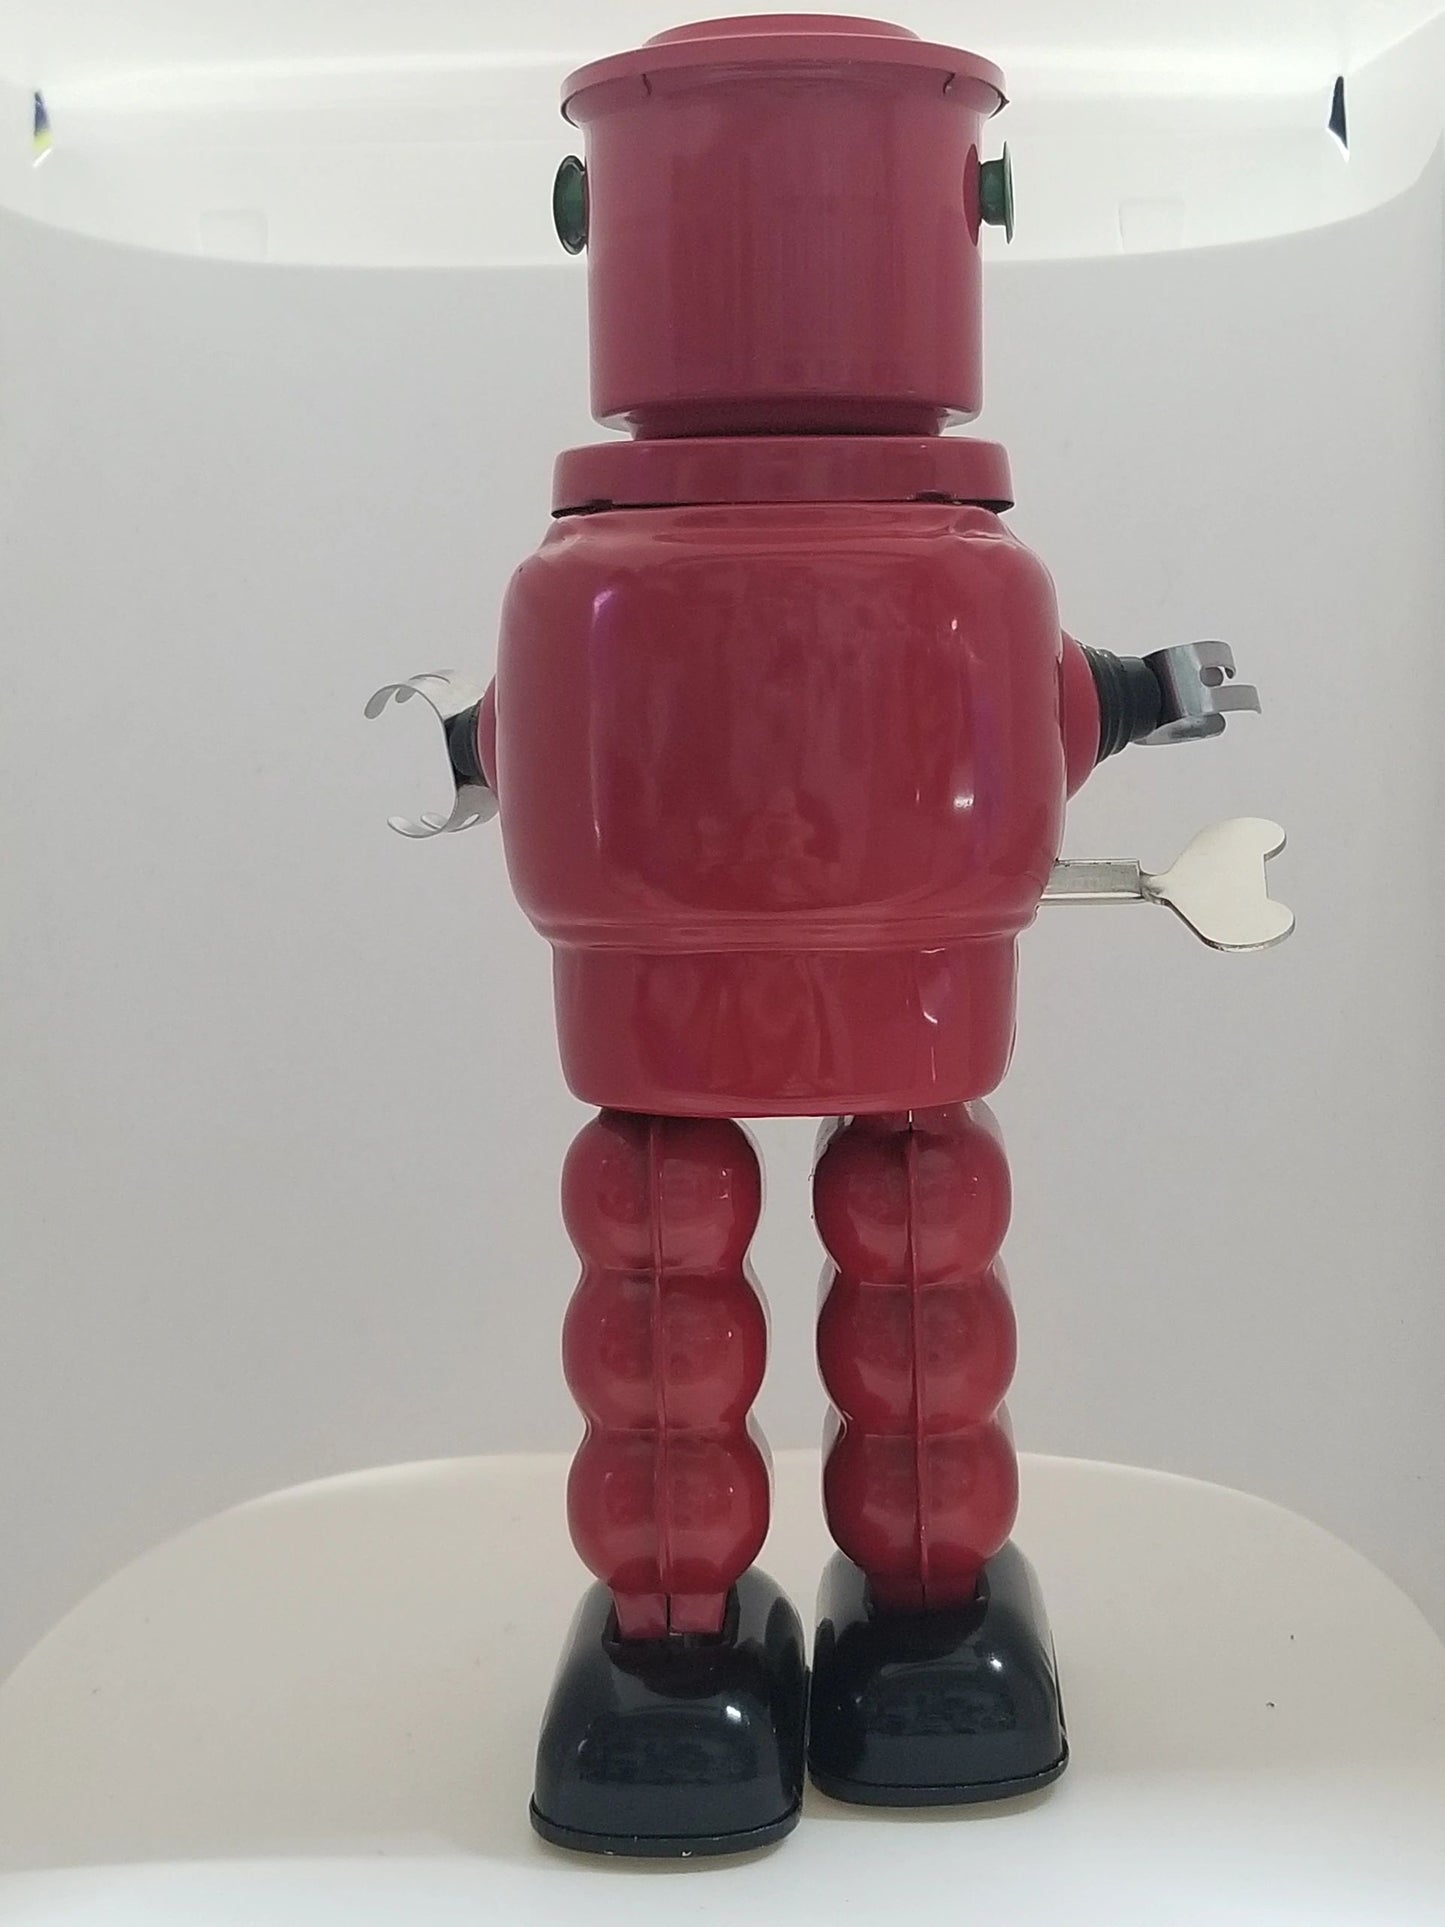 Big Red Tin Robot Wind-up Collector's Toy